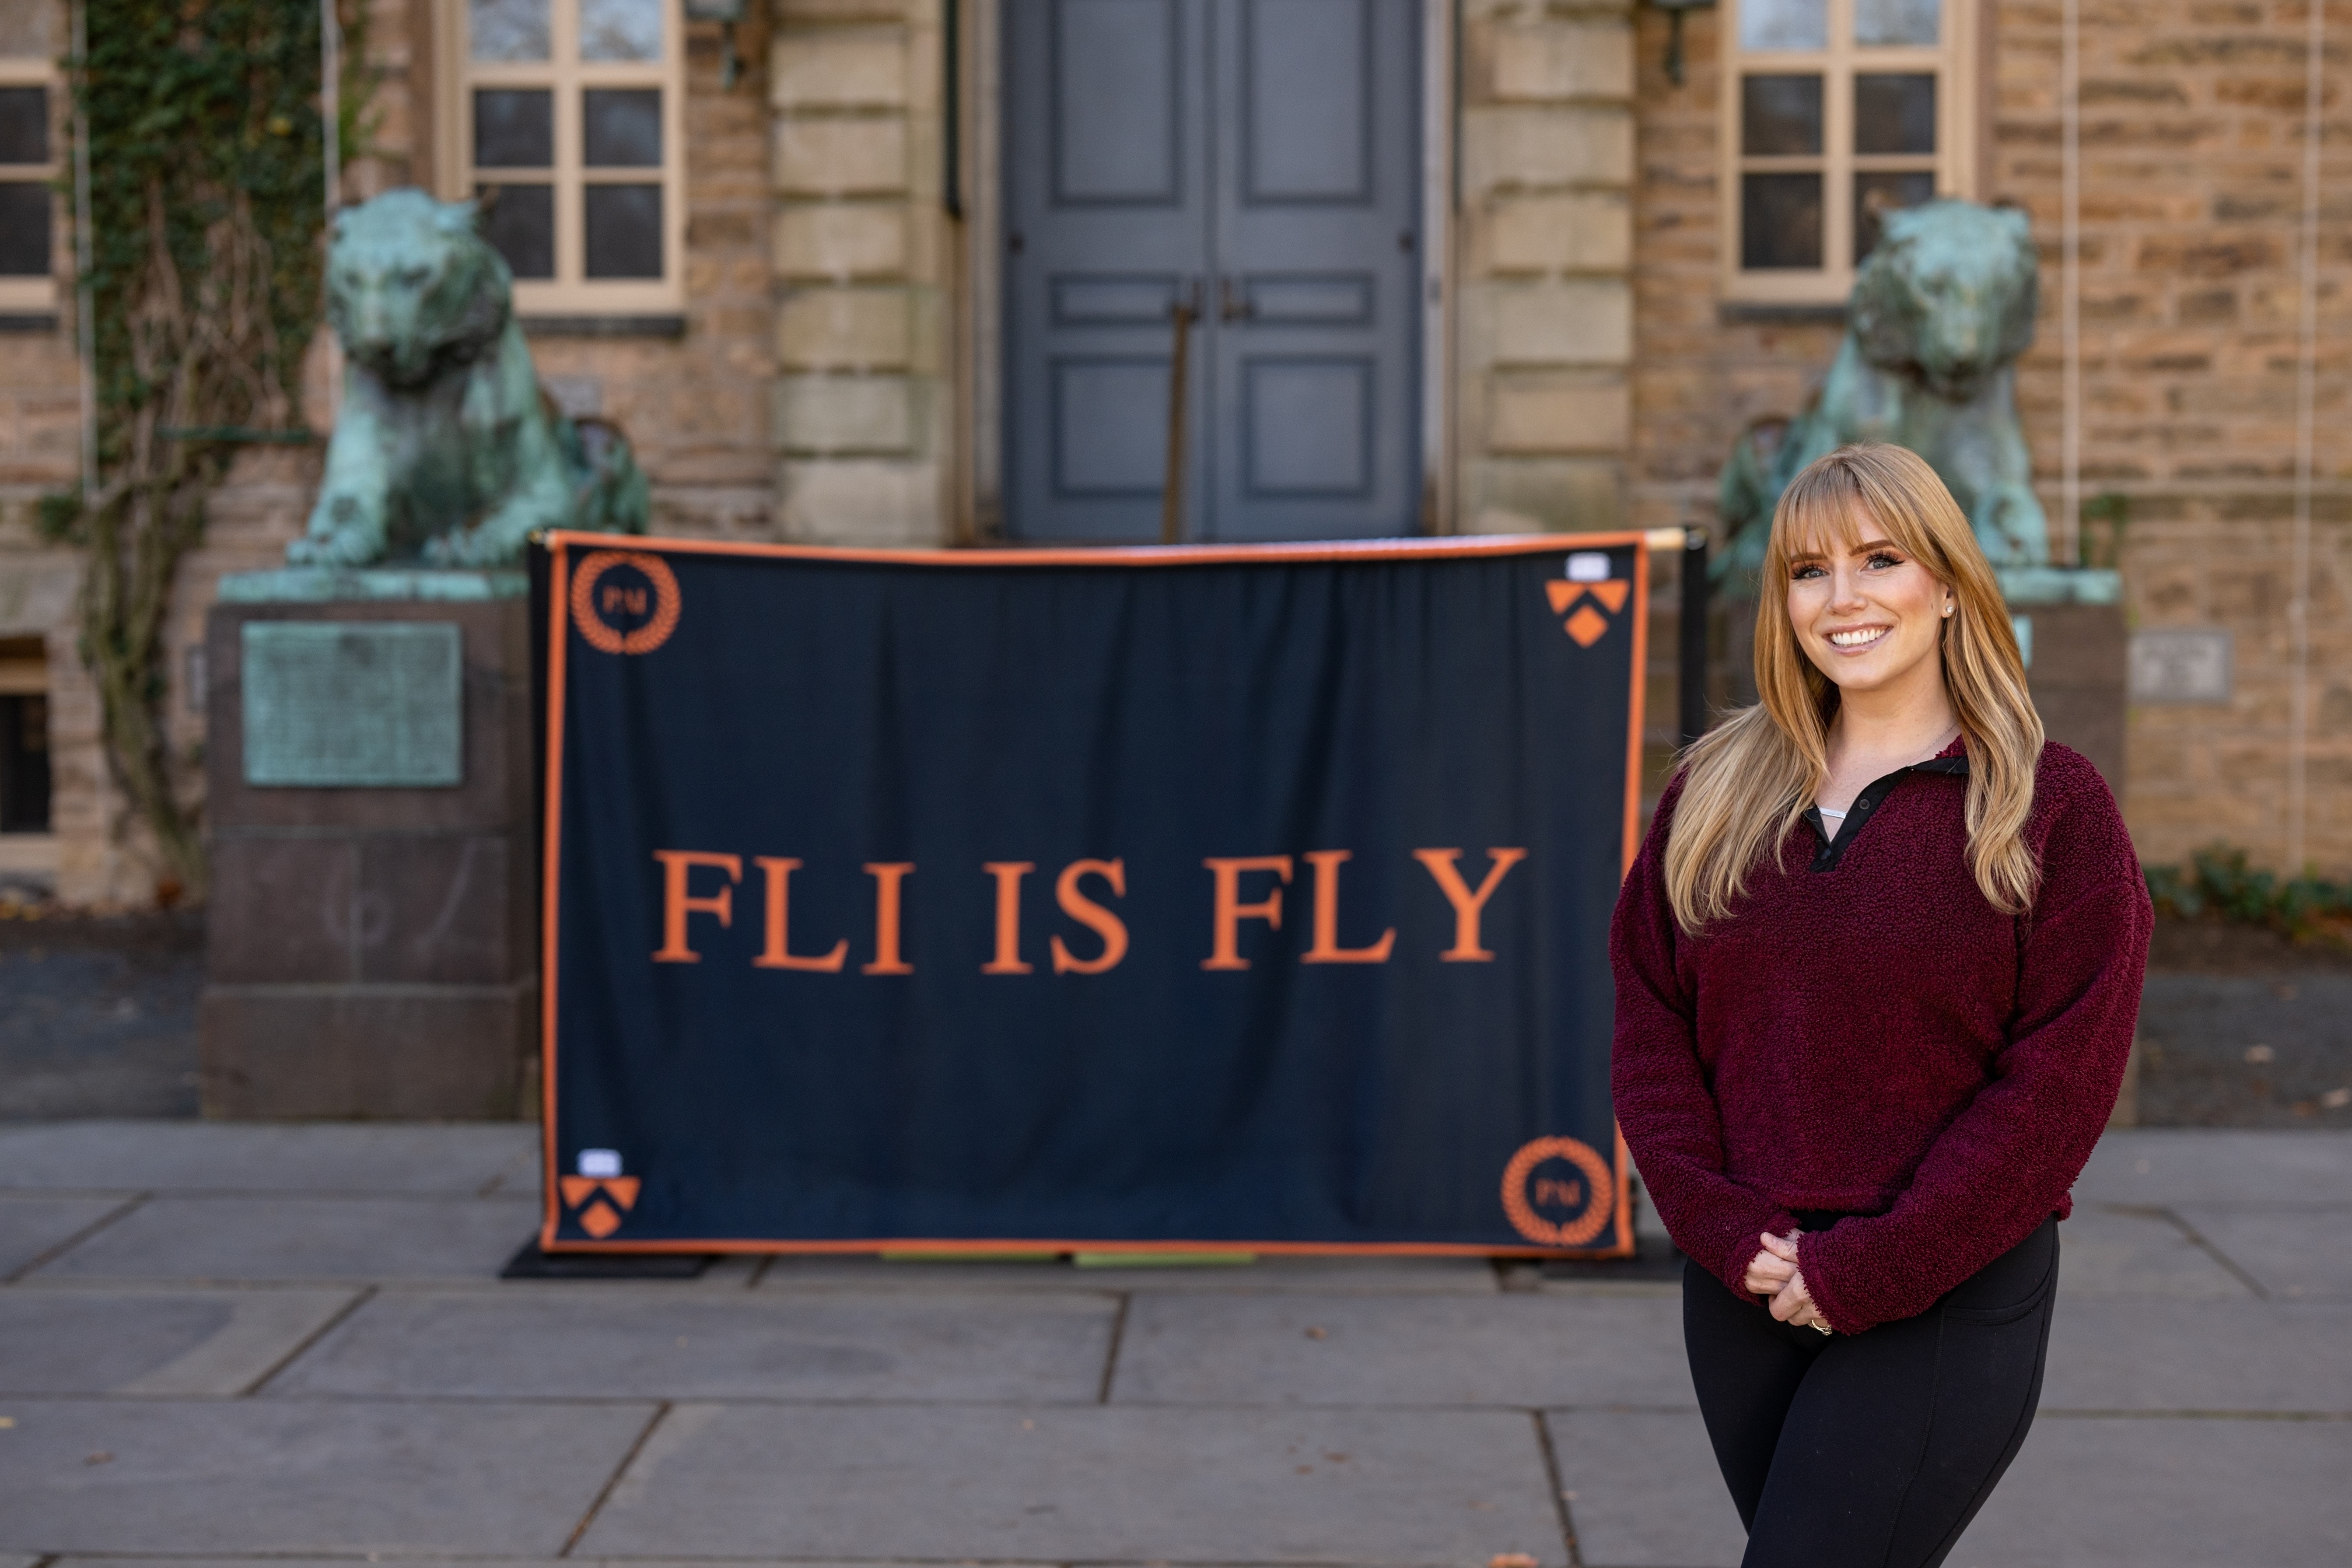 Woman stand in front of banner reading "FLI IS FLY," in front of stone building with two tiger sculptures